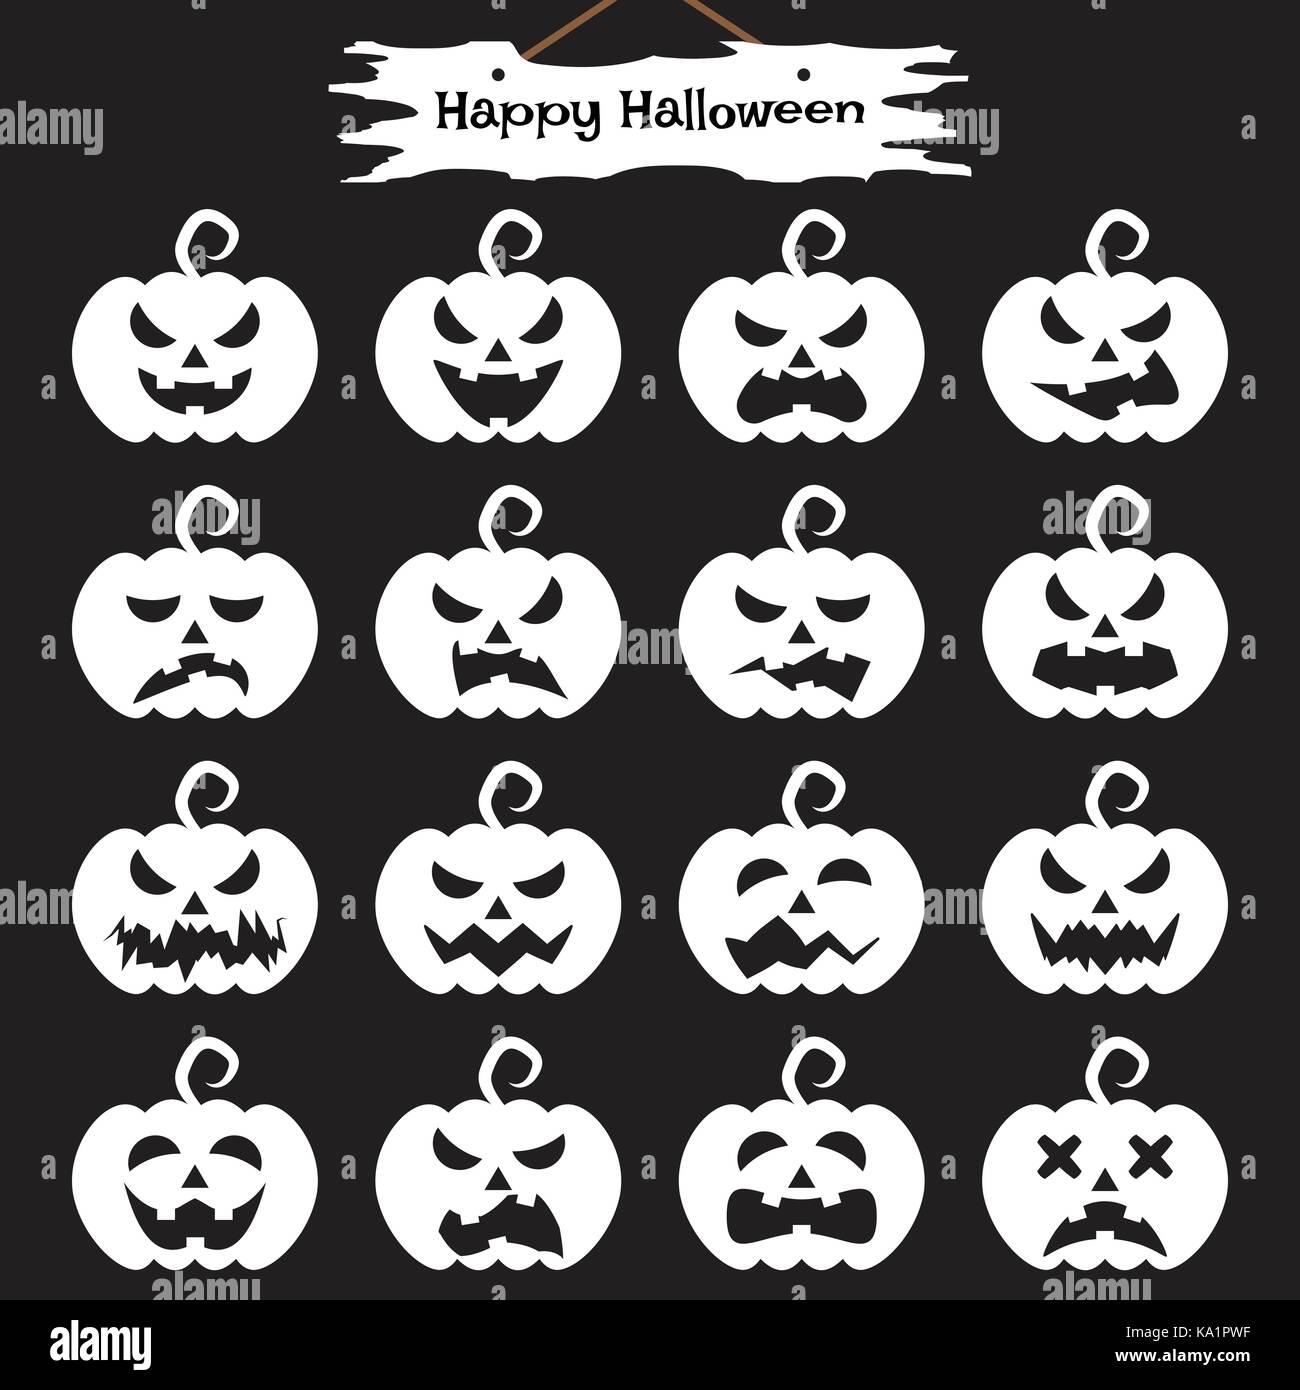 Vector Easy-To-Use 16 Flat Emoticons Of White Pumpkin As Different Facial Expressions On Black Background With  Happy Halloween Plank Hung Above Stock Vector